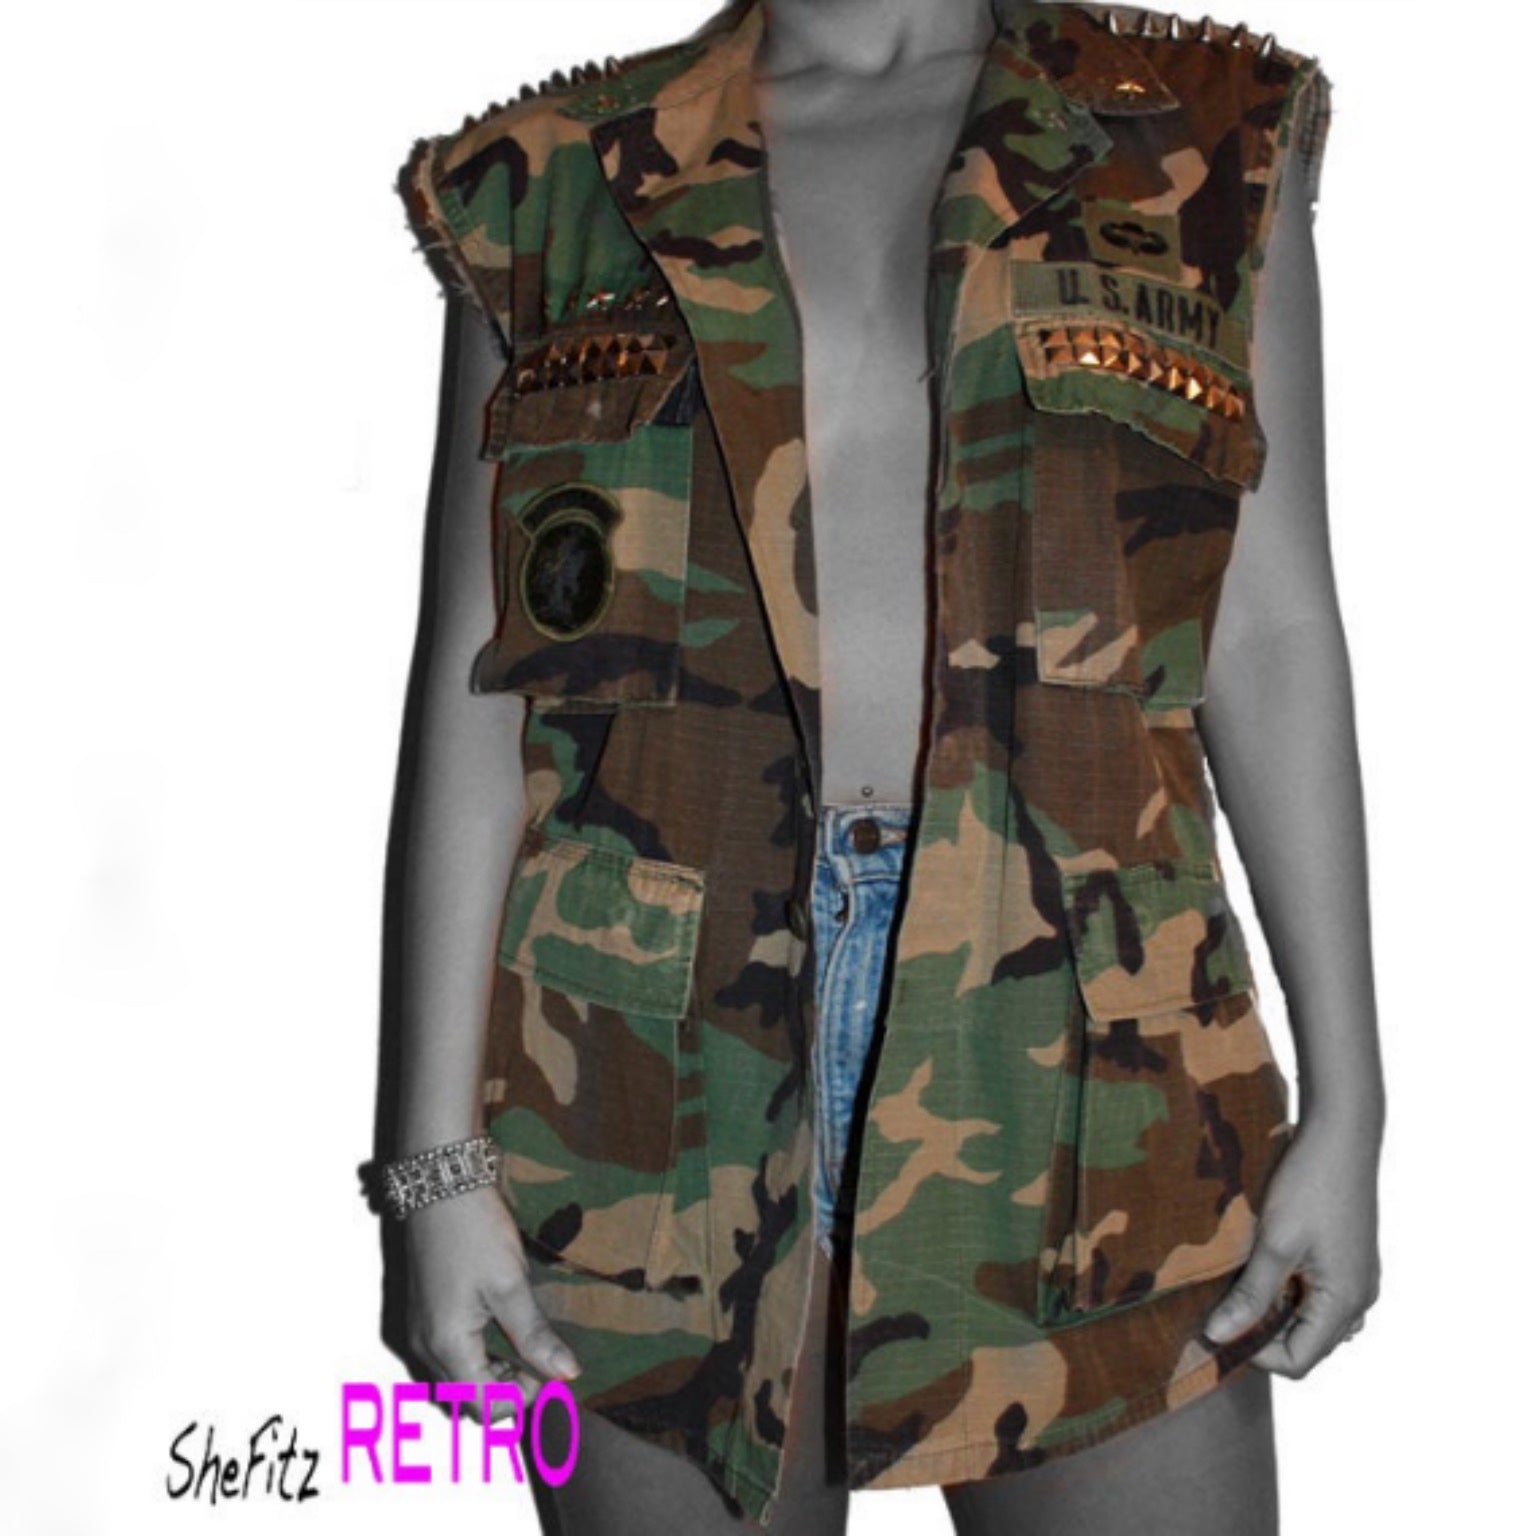 Made To Order Edgy Unisex Vintage Studded Camo Vest